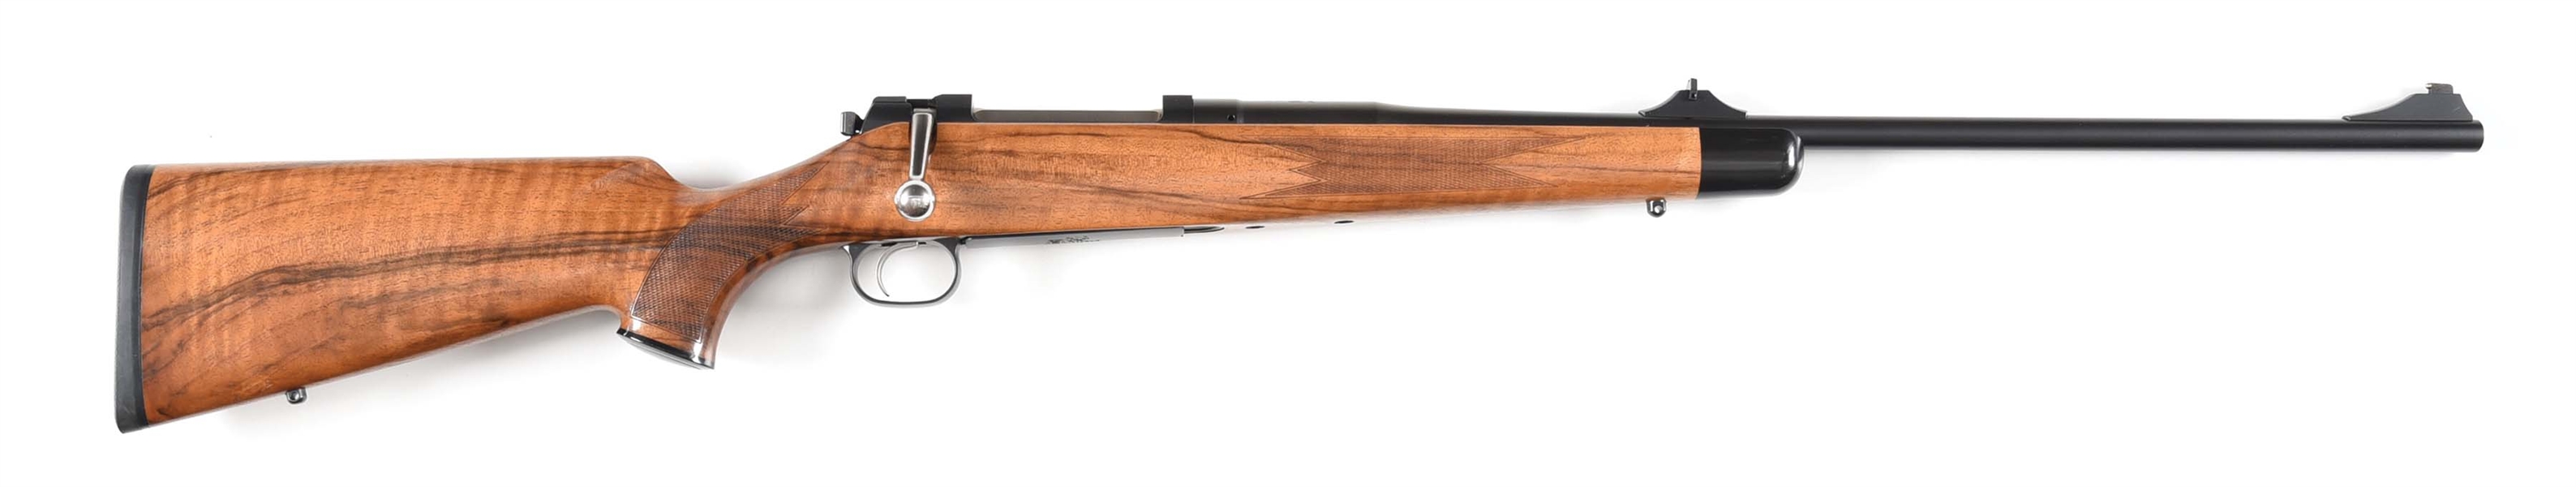 (M) MAUSER M03 .300 WIN MAG BOLT ACTION RIFLE.